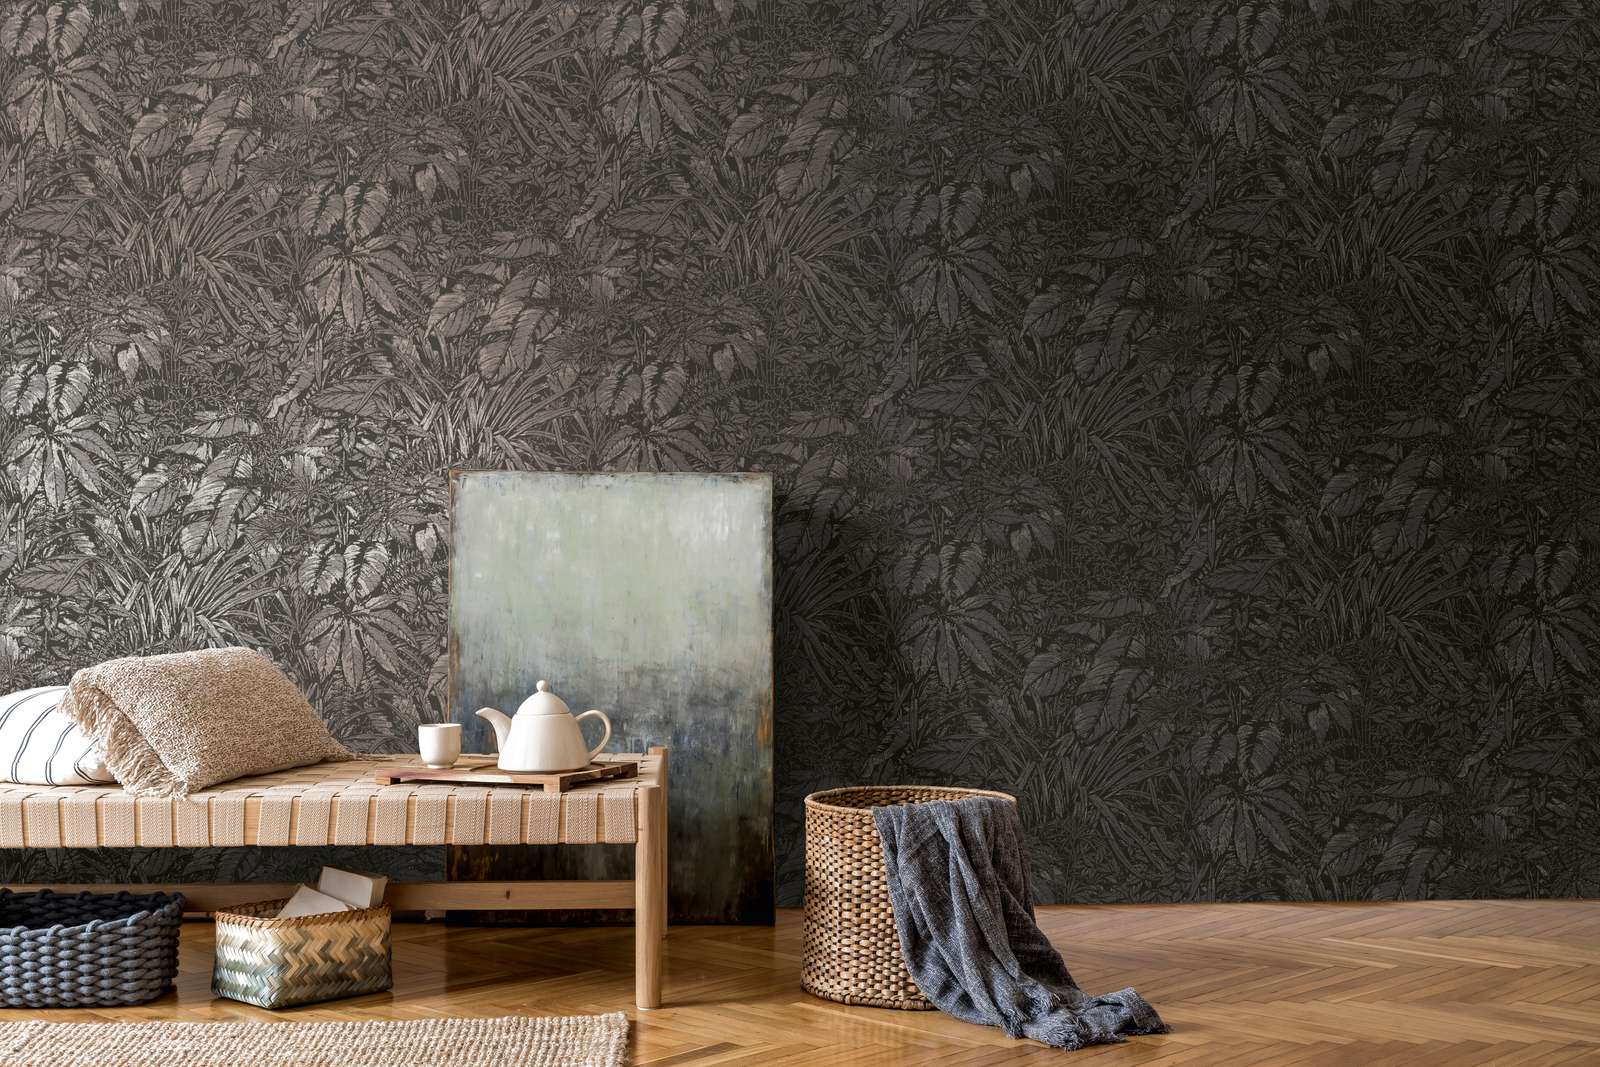             Floral non-woven wallpaper with jungle pattern - black, grey, silver
        